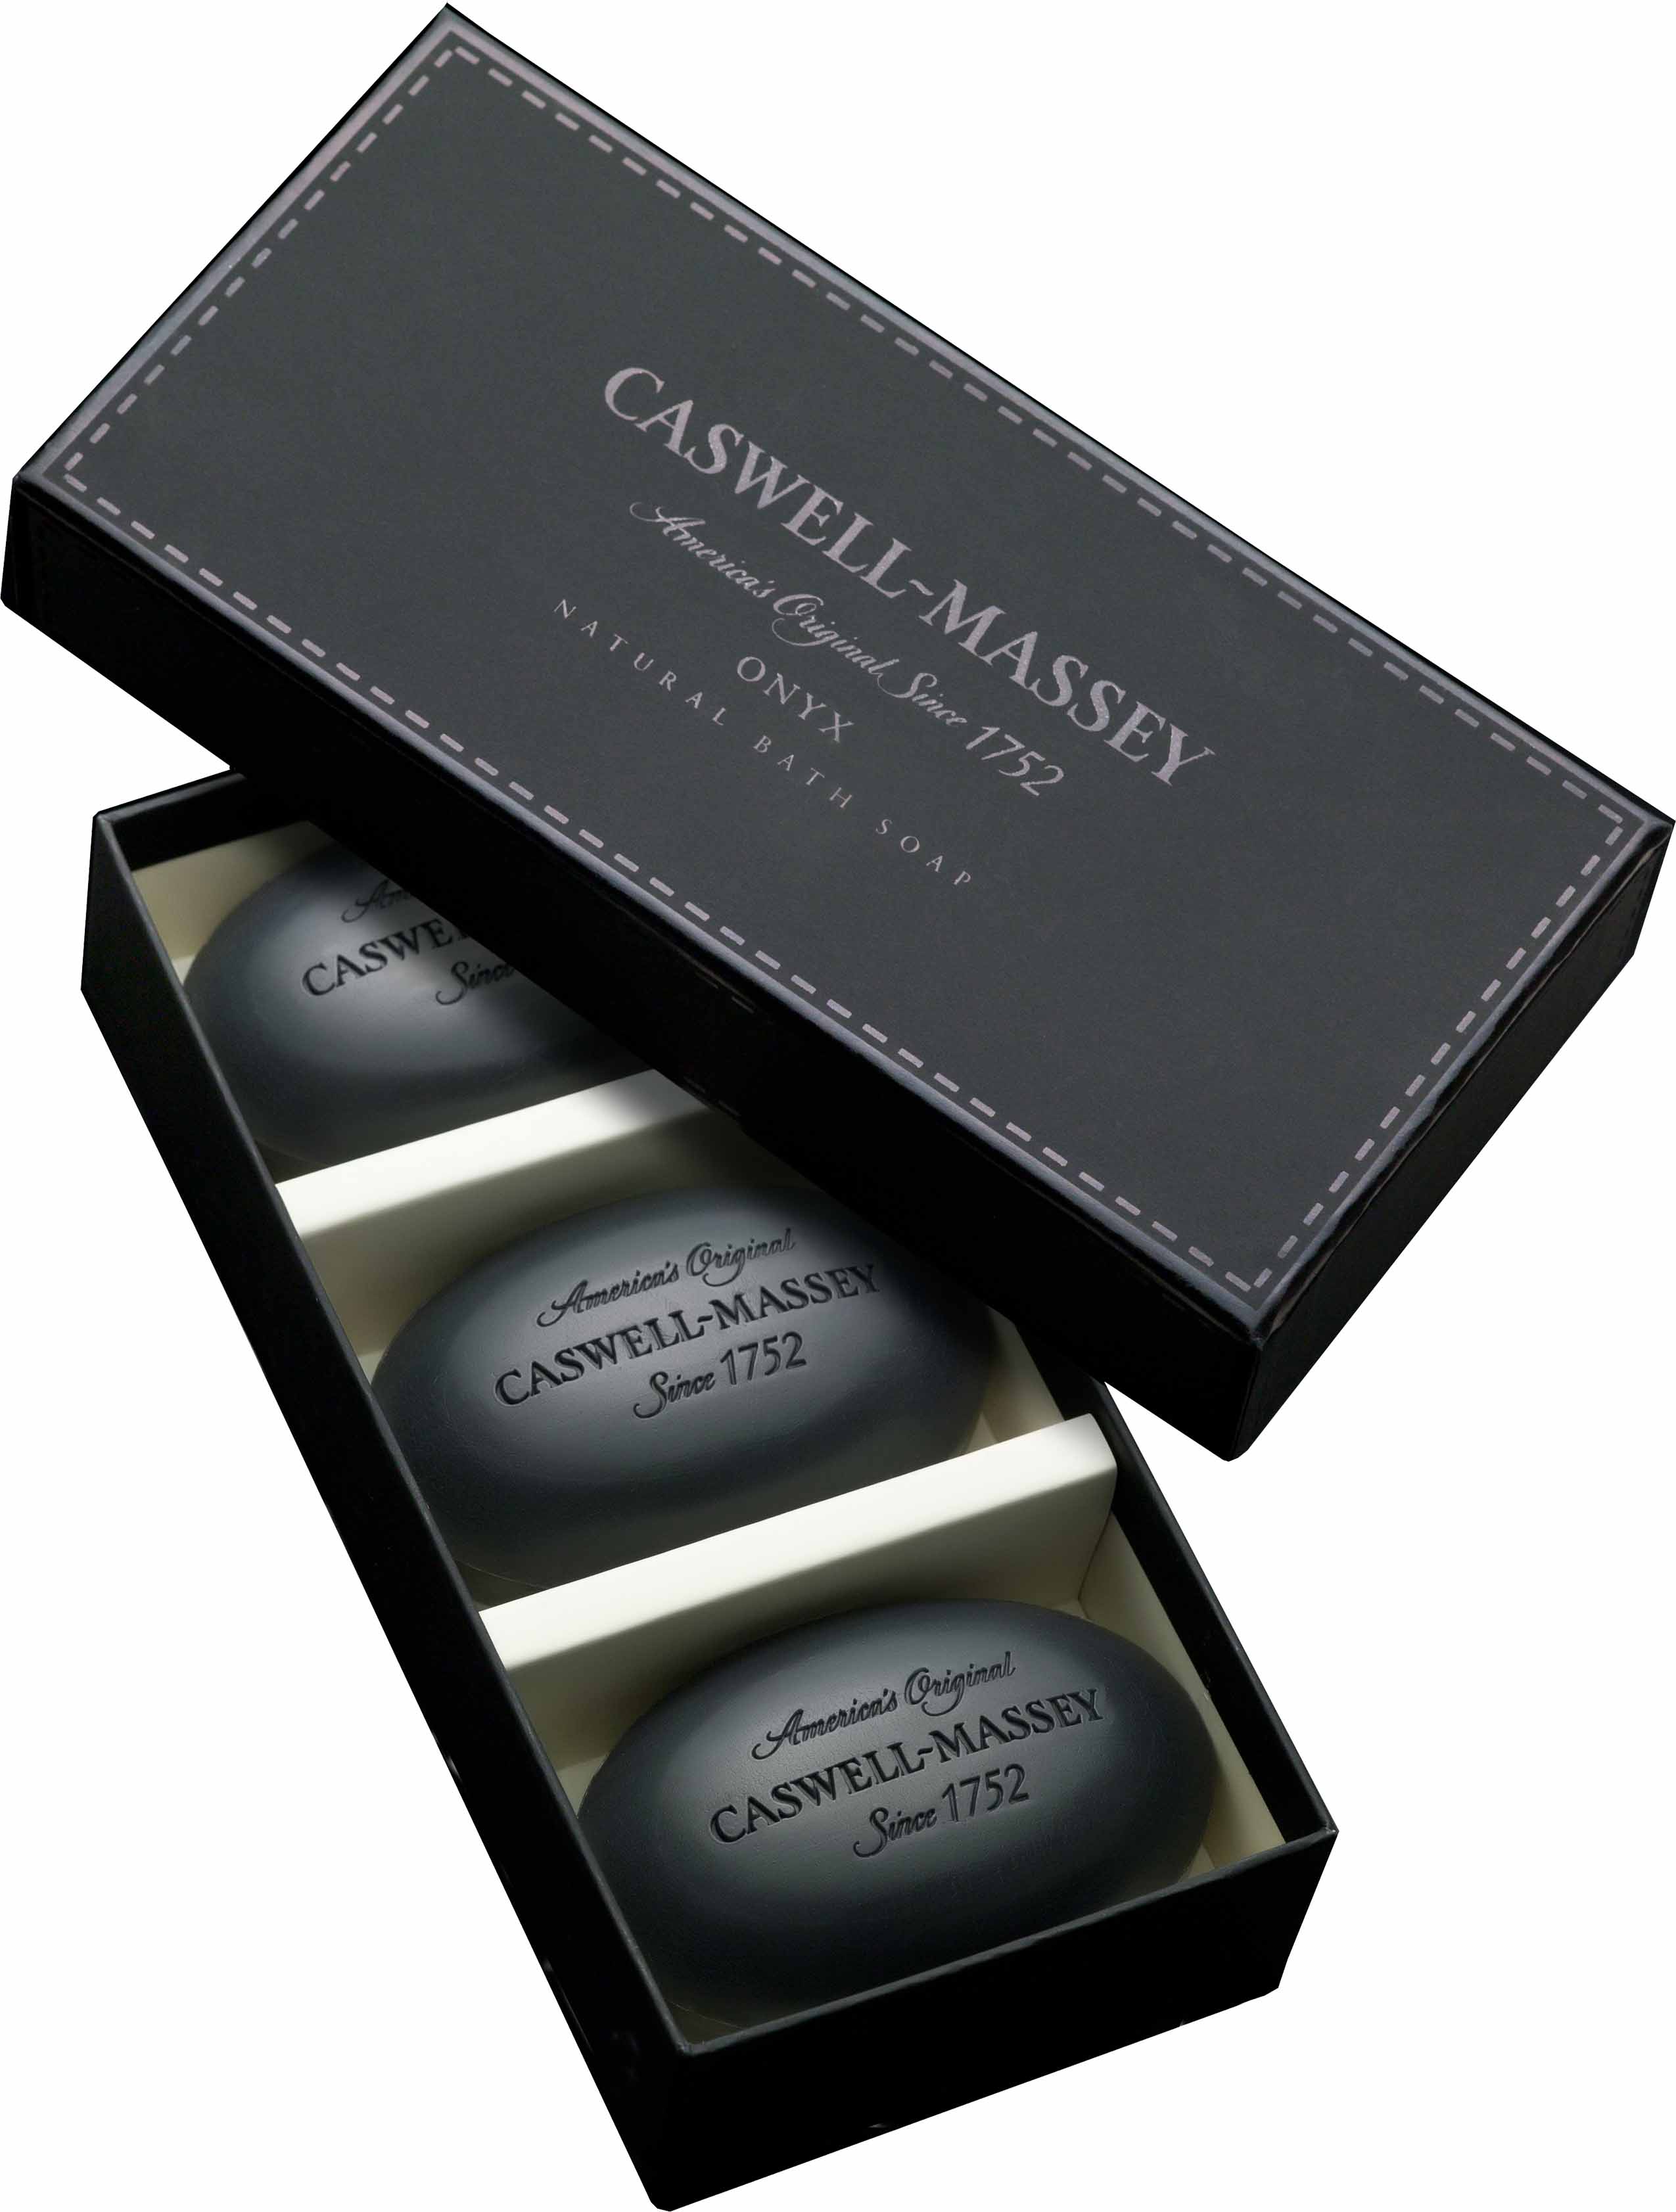 Caswell-Massey Onyx Natural Bath Soap